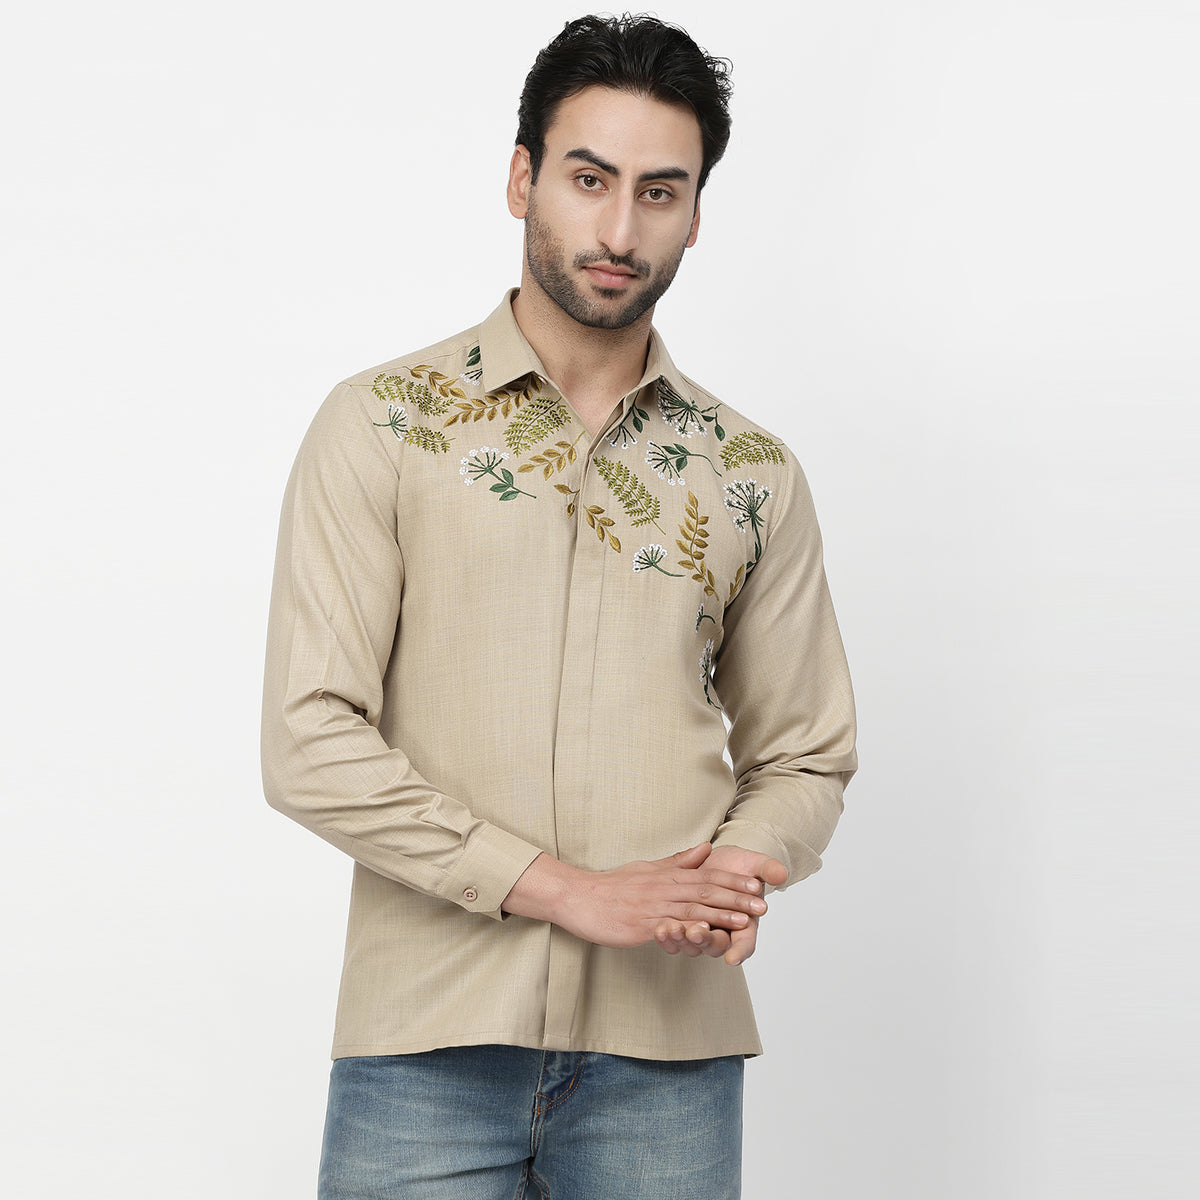 Linen Shirt With Leaf Embroidery | LELA By Varija